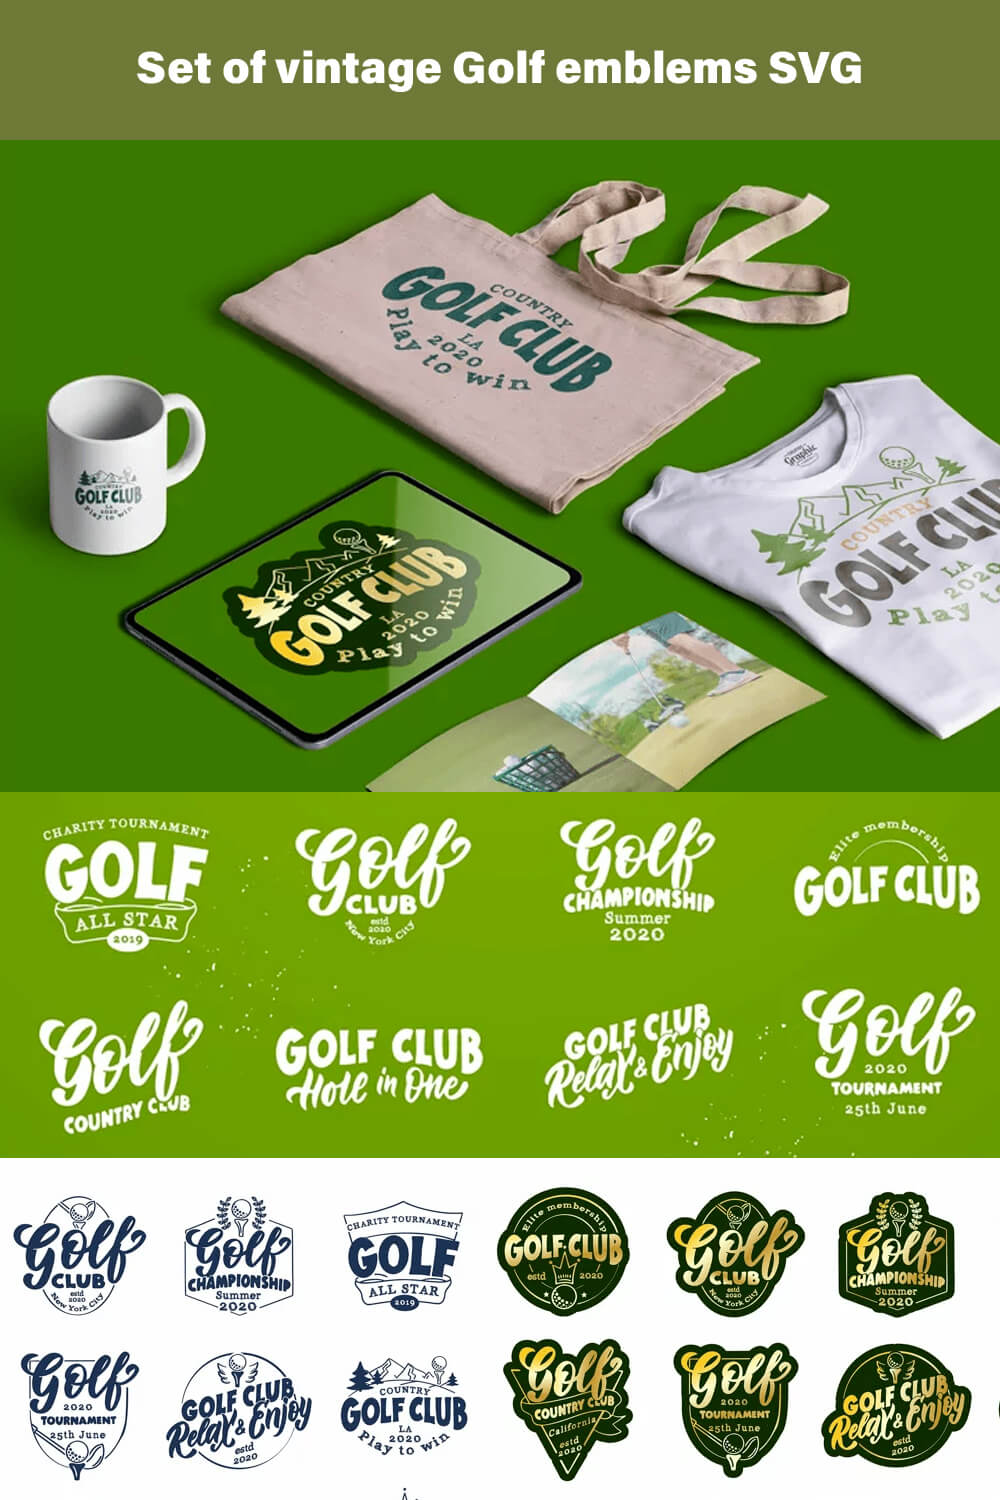 Vintage golf emblems SVG on the white t-shirt, cup and white bag.